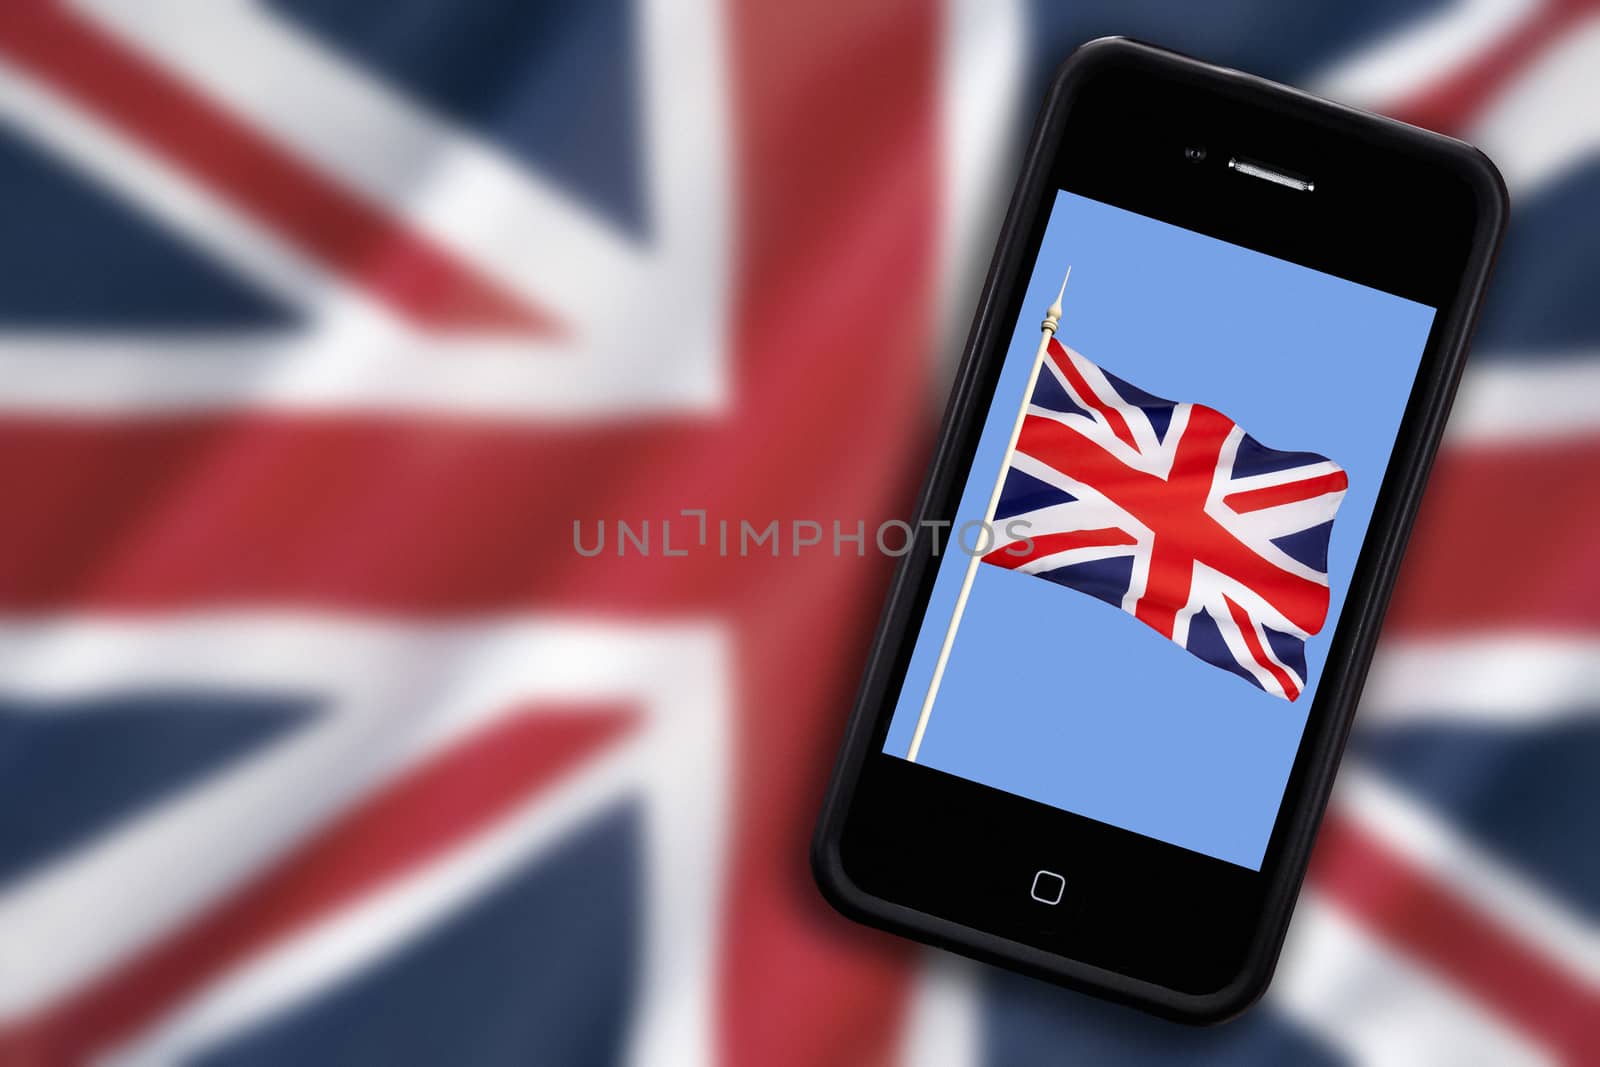 The national flag of Great Britain - with the flag on a smartphone screen.